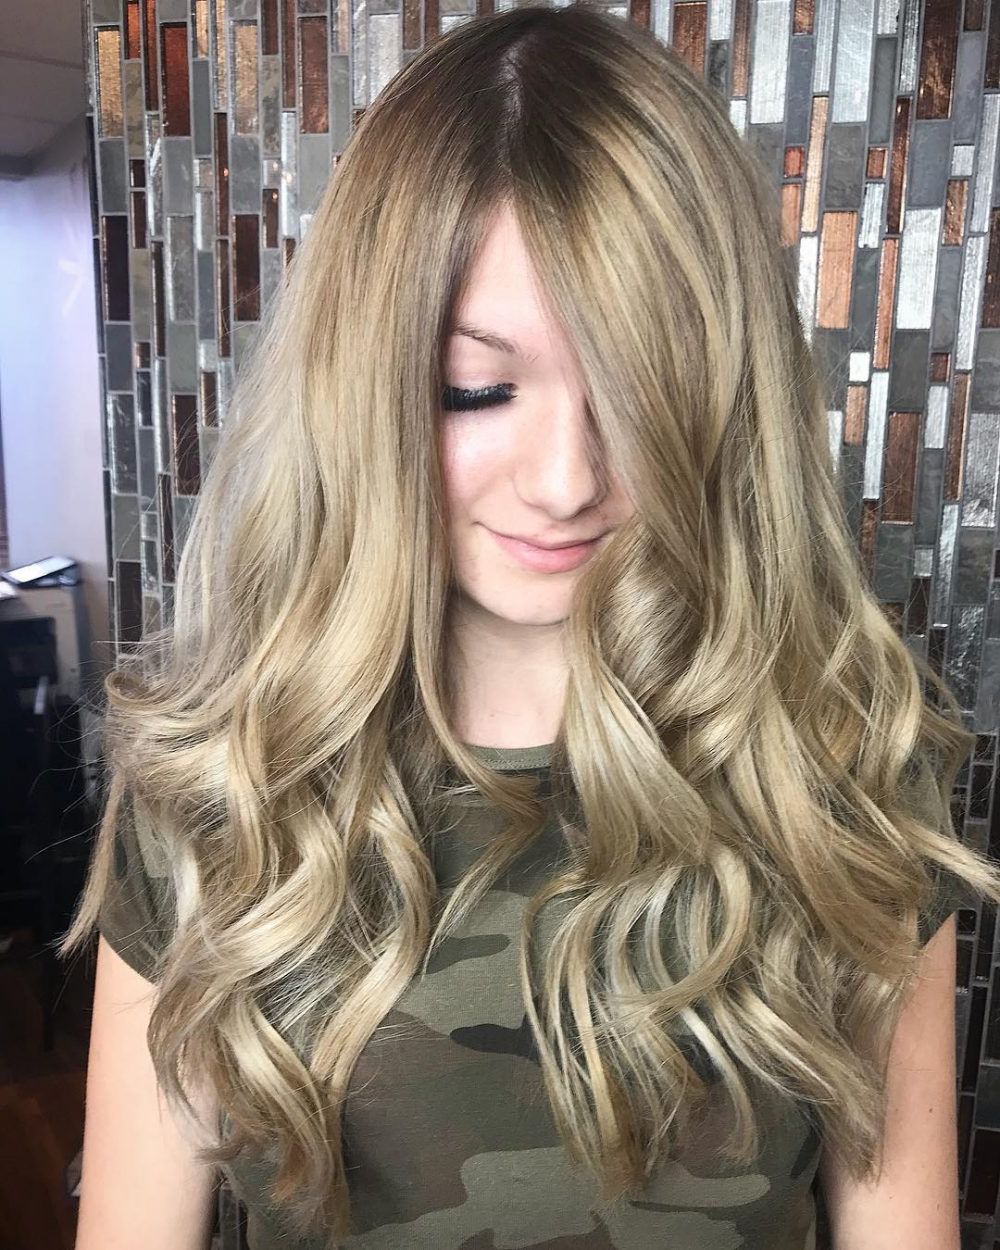 24 Long Wavy Hair Ideas That Are Freaking Hot In 2019 With Recent Voluminous Wavy Layered Hairstyles With Bangs (View 7 of 20)